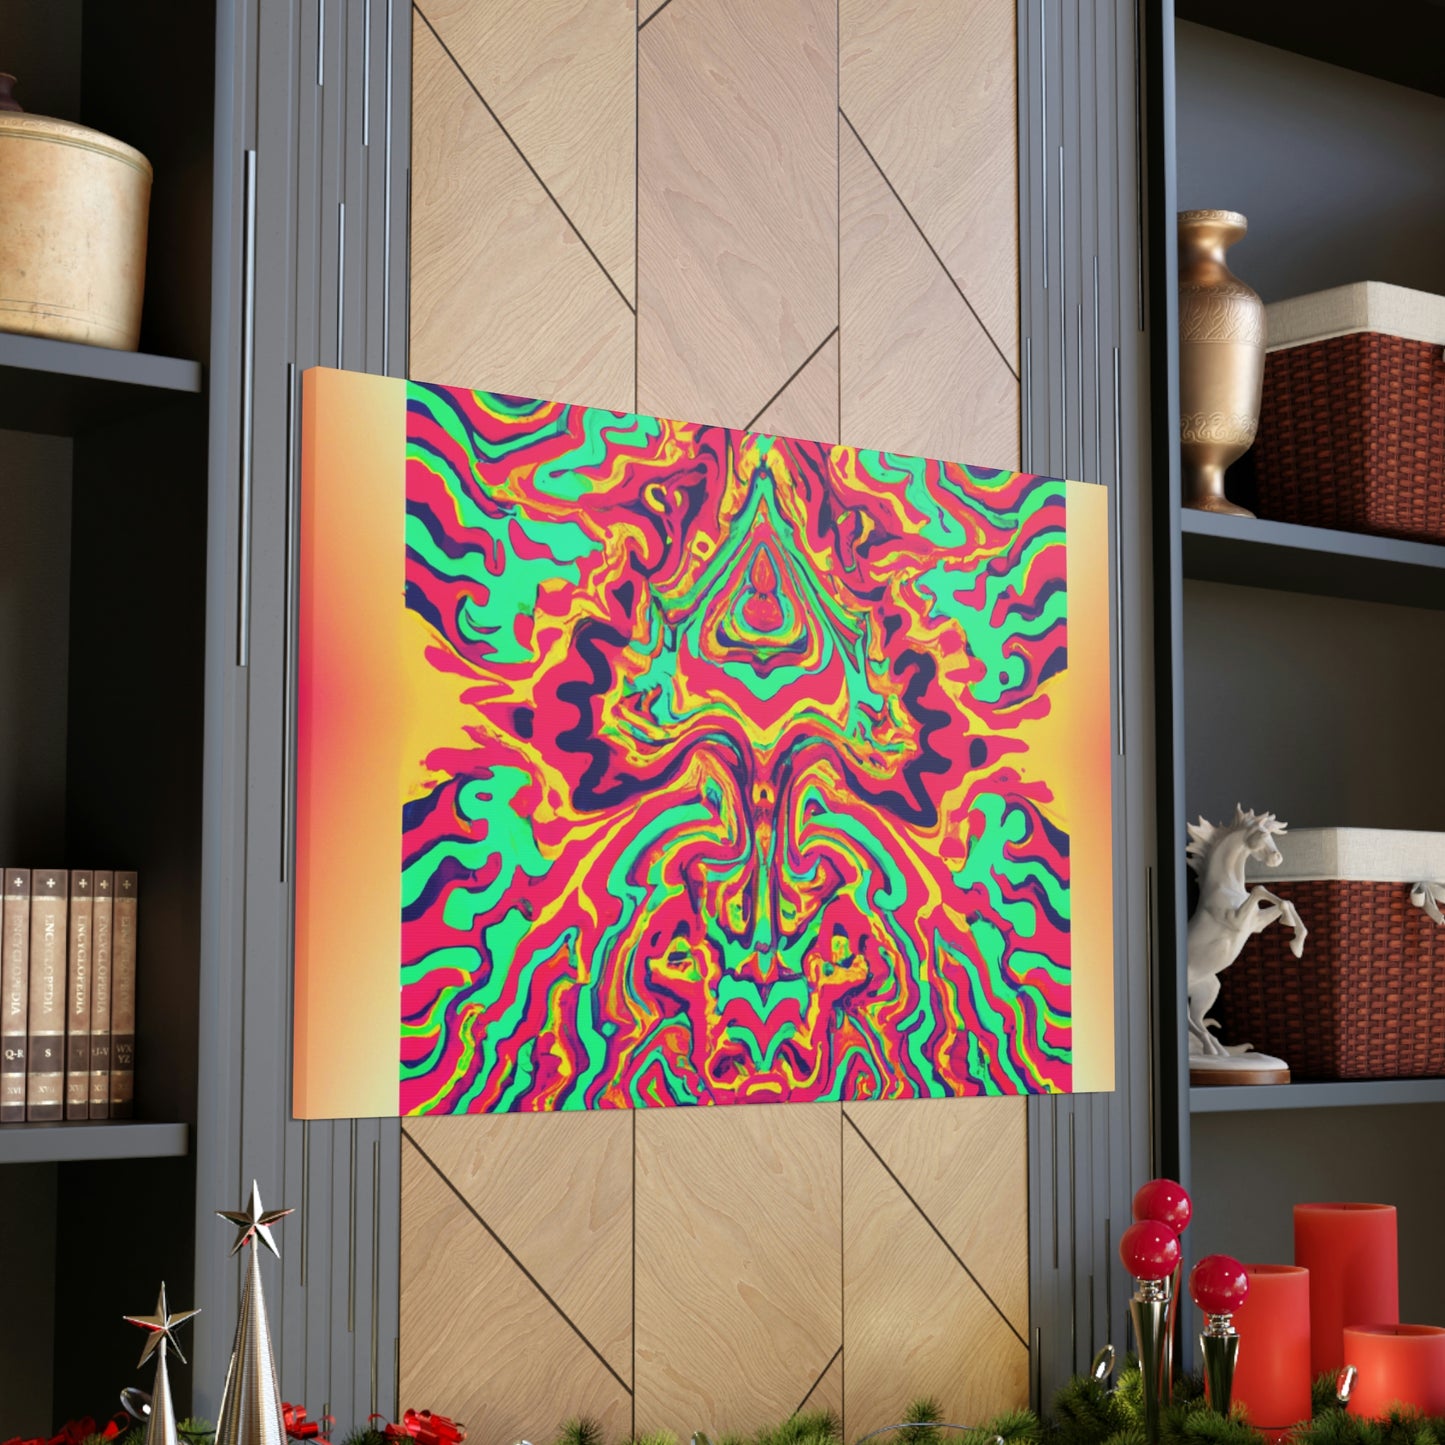 Montgomery Frye - Psychedelic Canvas Wall Art